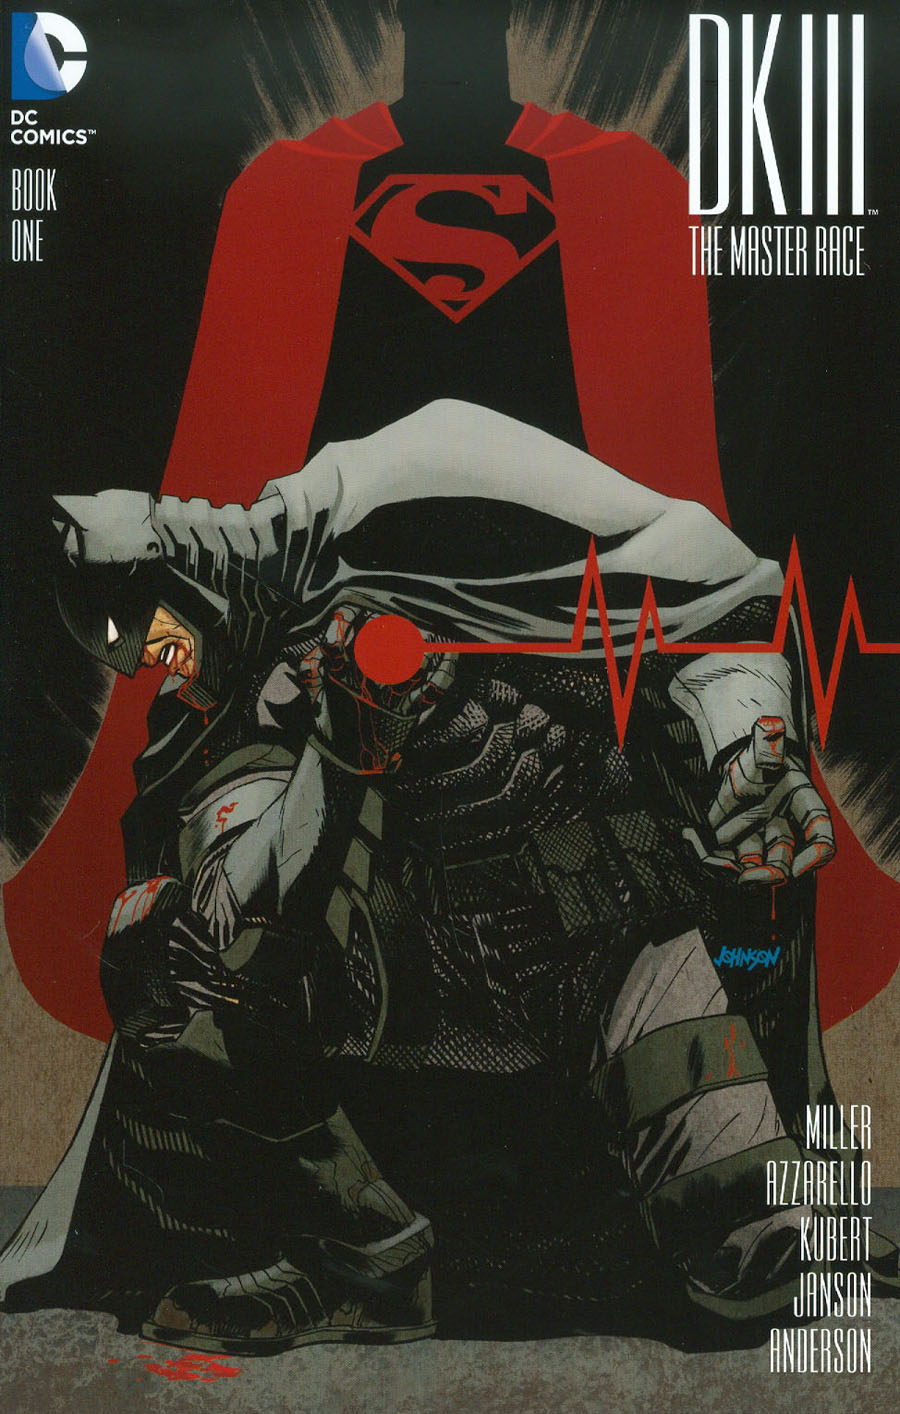 LCSD 2015 Dark Knight III The Master Race #1 Variant Dave Johnson Cover